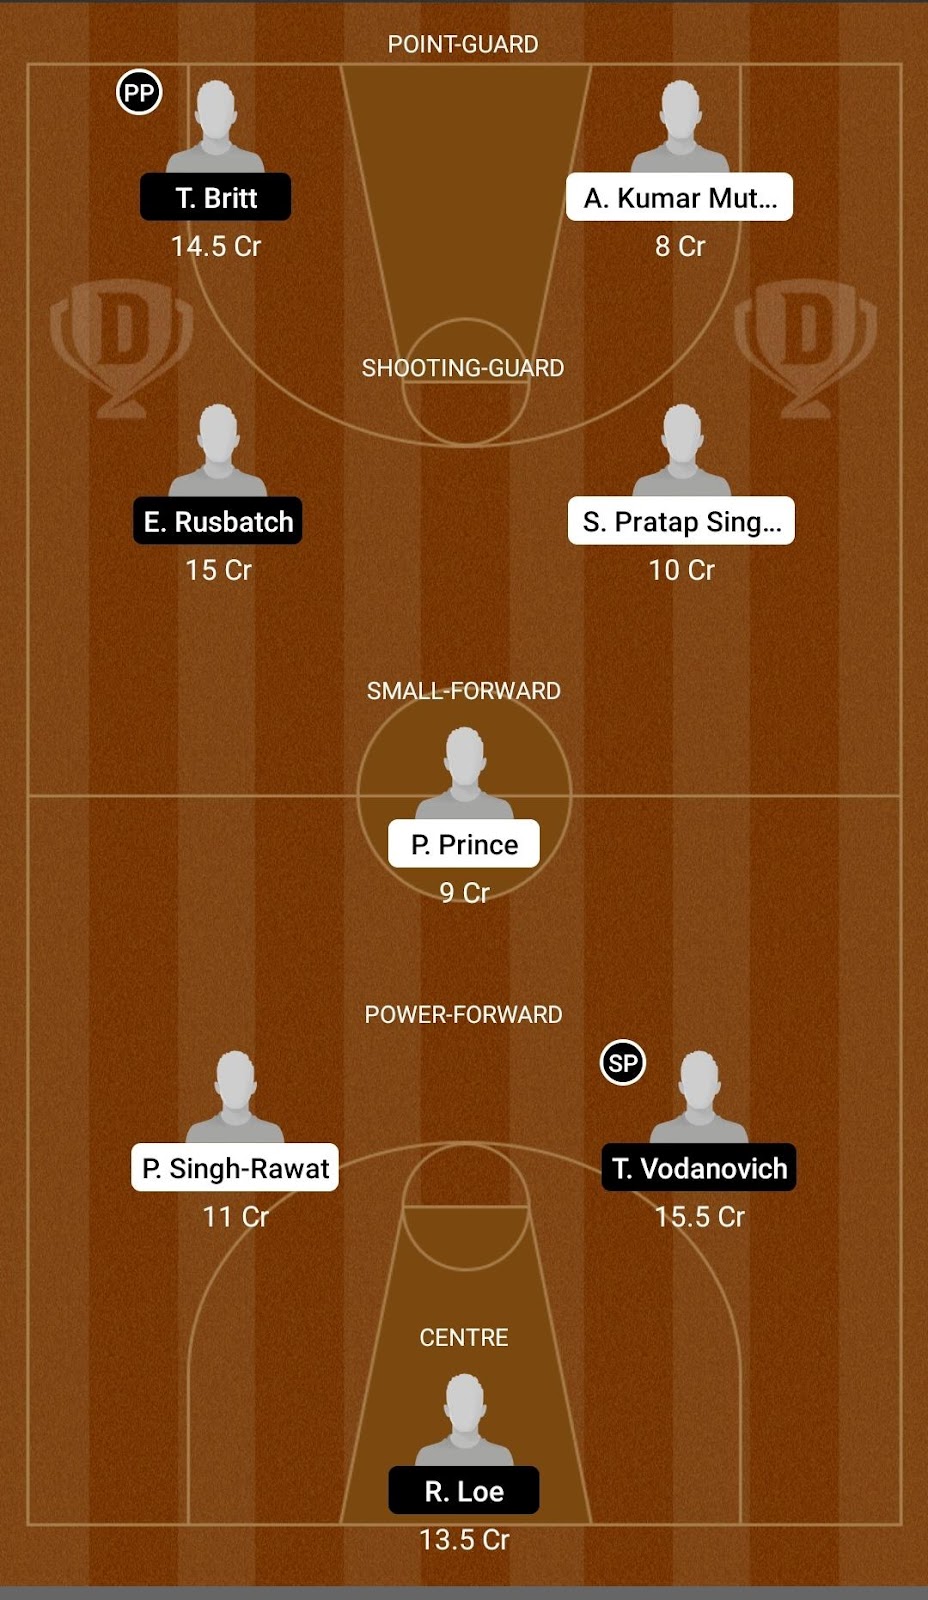 IND vs NZL Dream 11 Prediction, Player stats, Playing 11, Dream11 team and Injury Update!